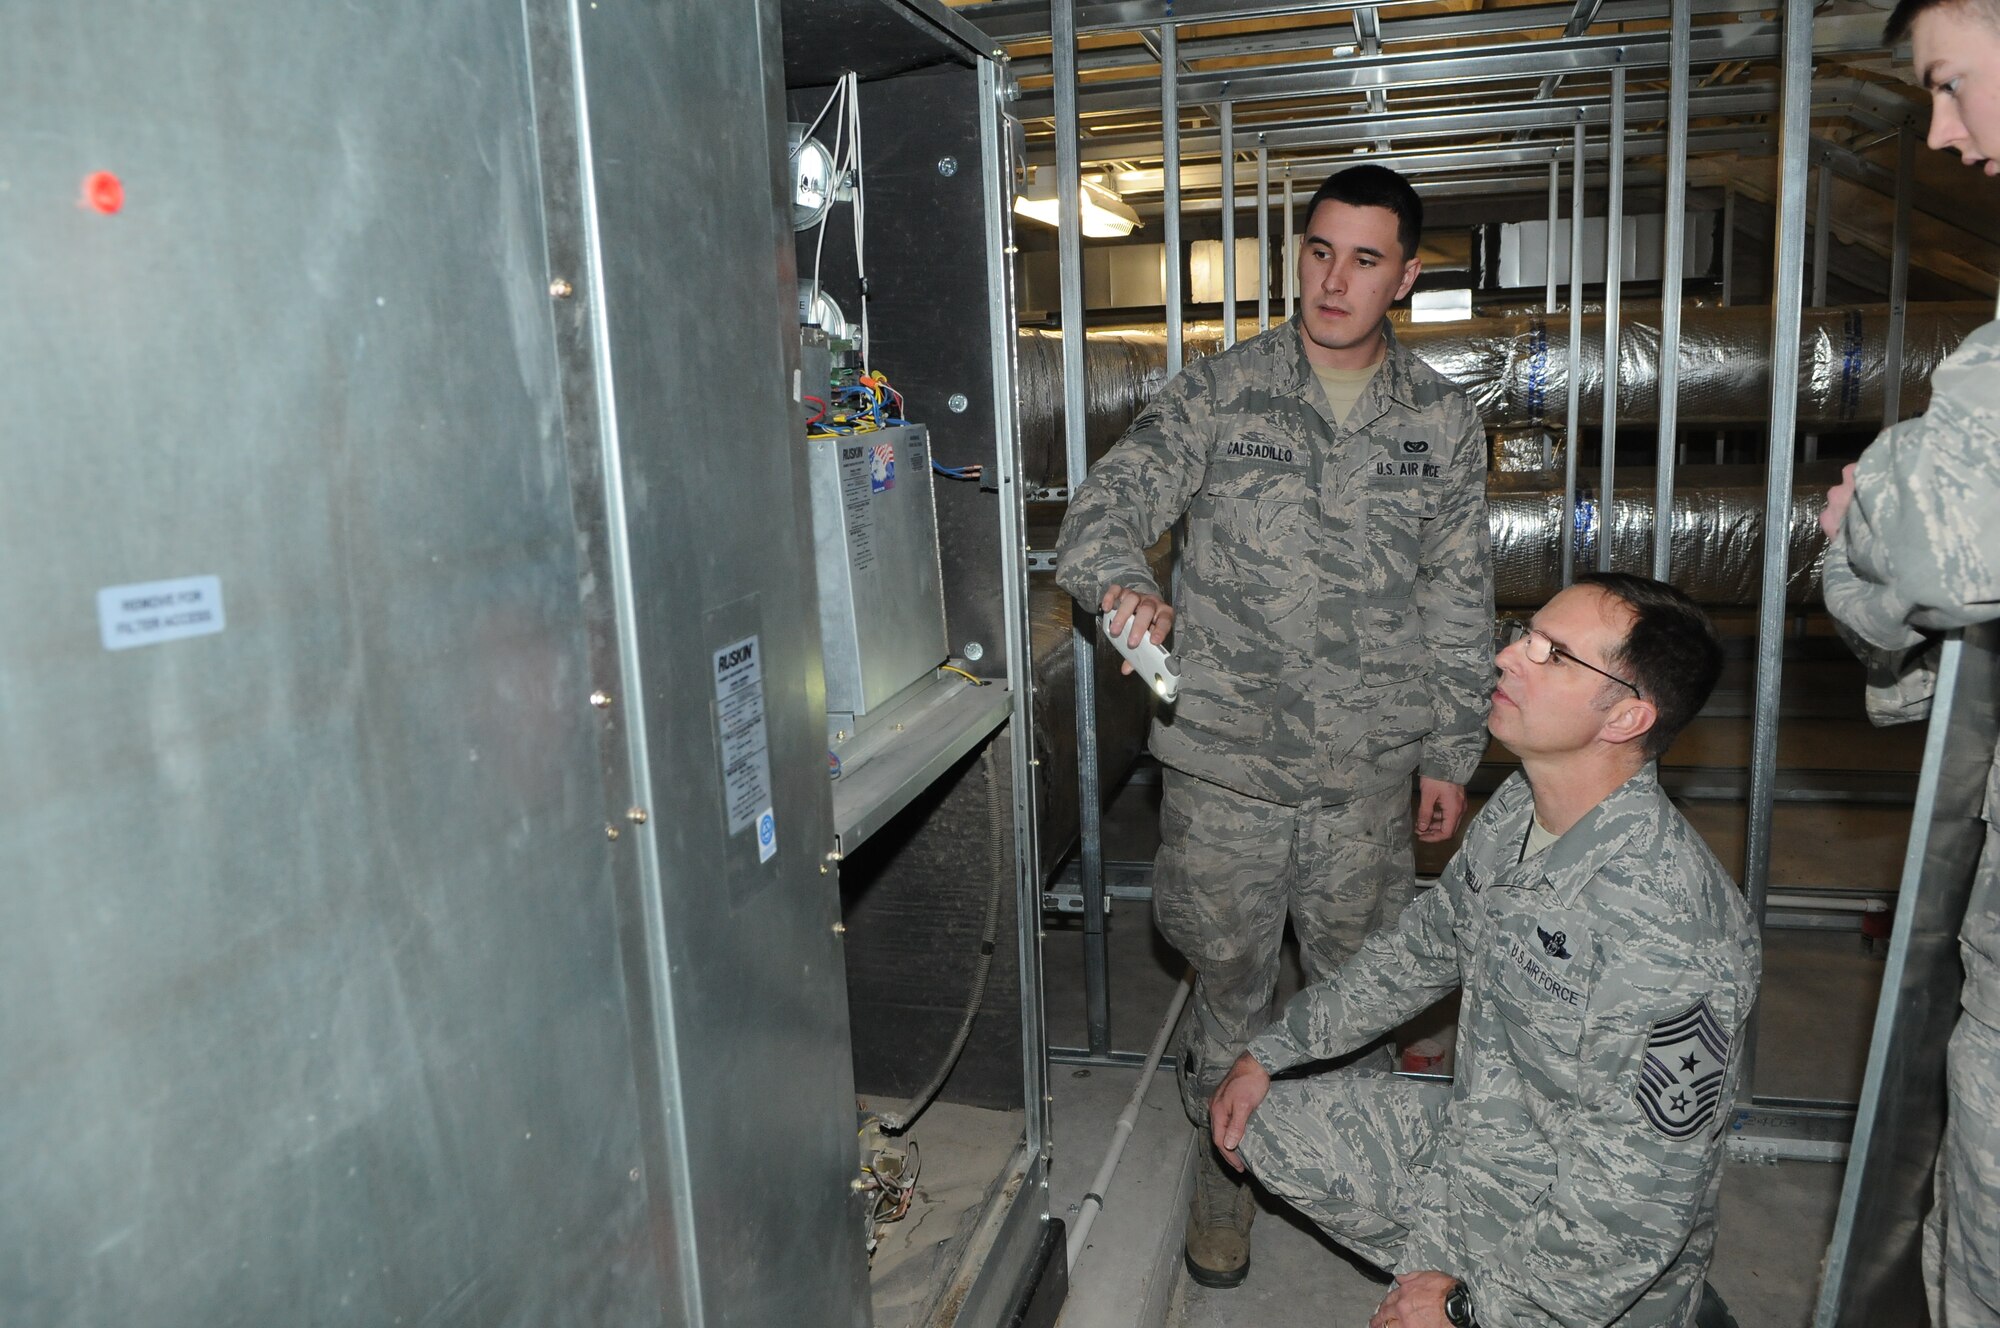 The Heating, Ventilation, Air Conditioning and Refrigeration (HVAC/R) shop works within the Operations Flight in the Civil Engineer Squadron and is responsible for sustaining 339 facilities valued $4.8B, supporting 11.6K military and civilian personnel.  The shop is manned by 39 Airmen and 8 civilians, all of whom installs, diagnose, and perform repairs on HVAC/R systems.  Additionally, the shop follows strict compliance of HAZMAT and ozone depleting gases to stay within strict EPA guidelines. (Photo courtesy of the Command Chief’s Office)